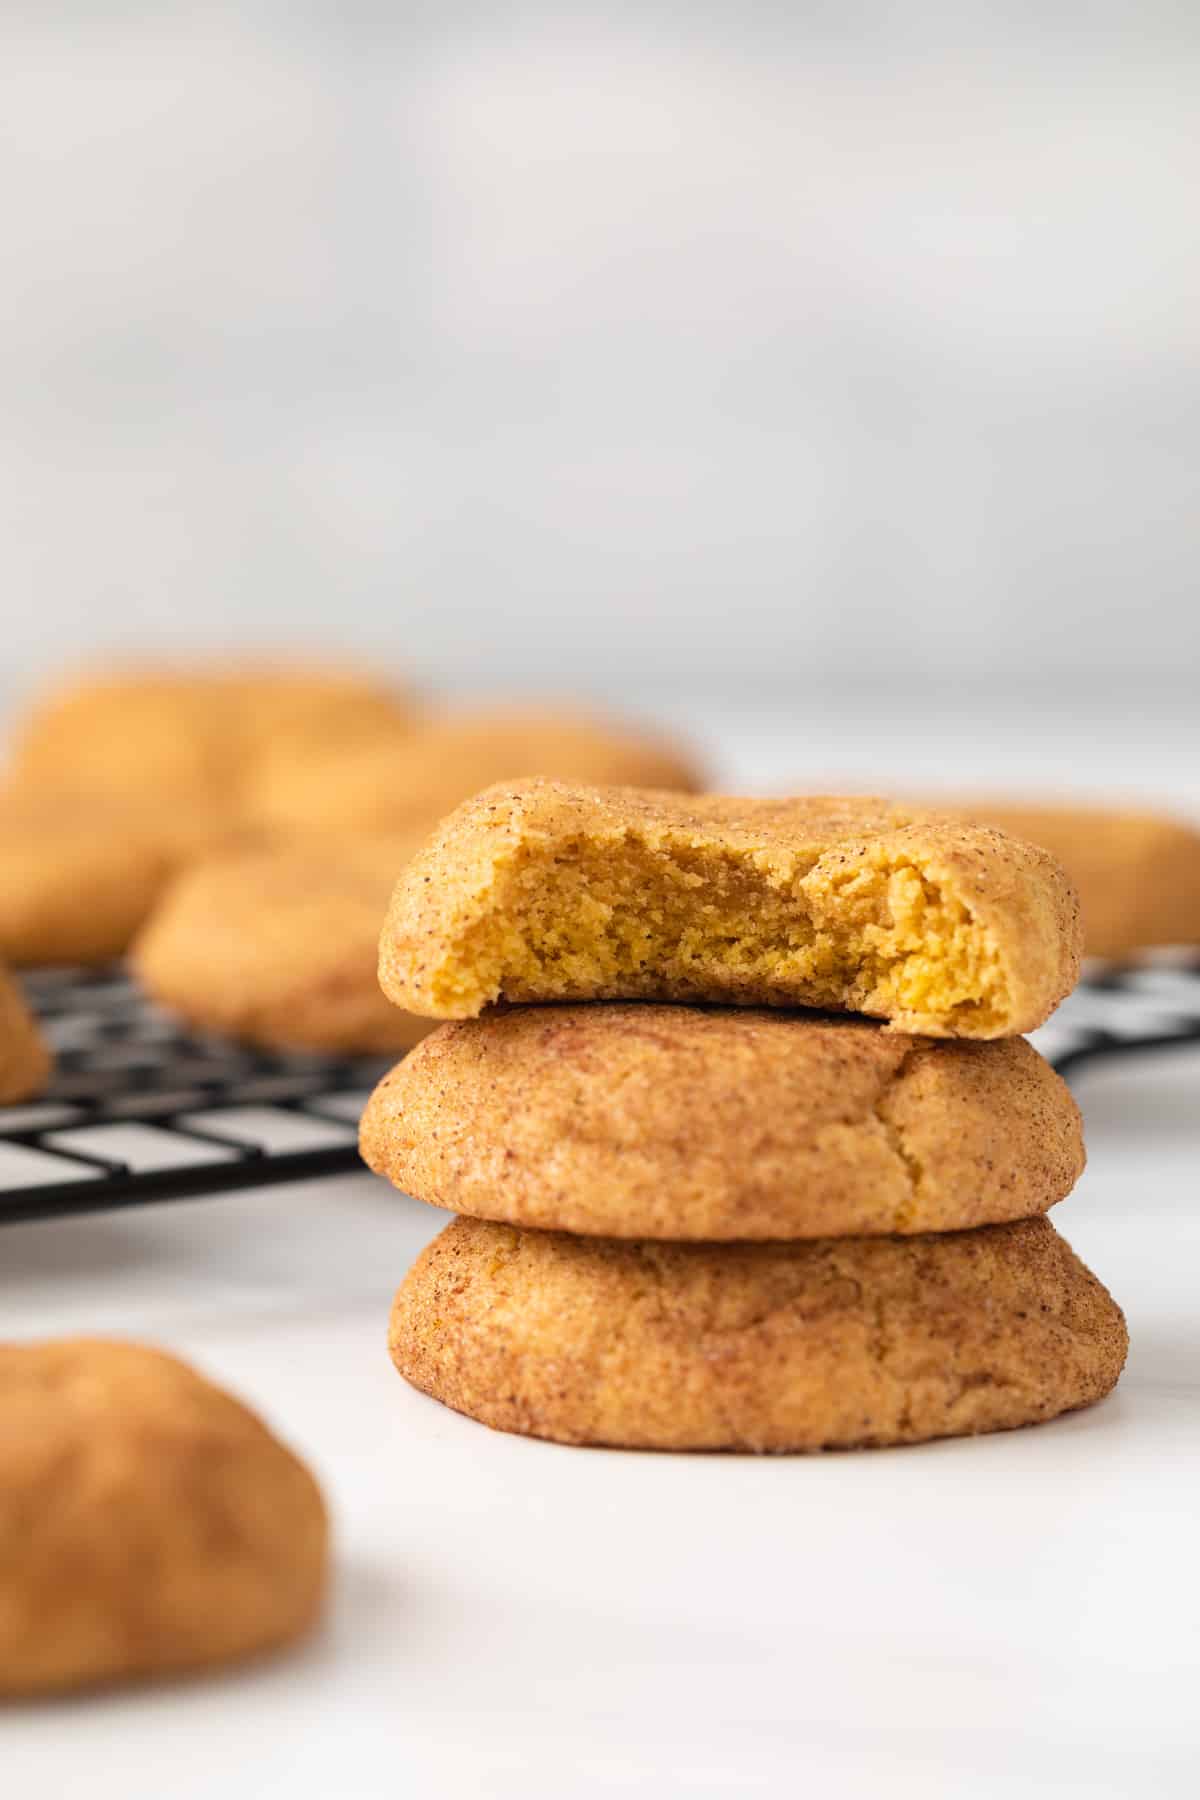 The pumpkin snickerdoodles stacked with a bite taken out of one.